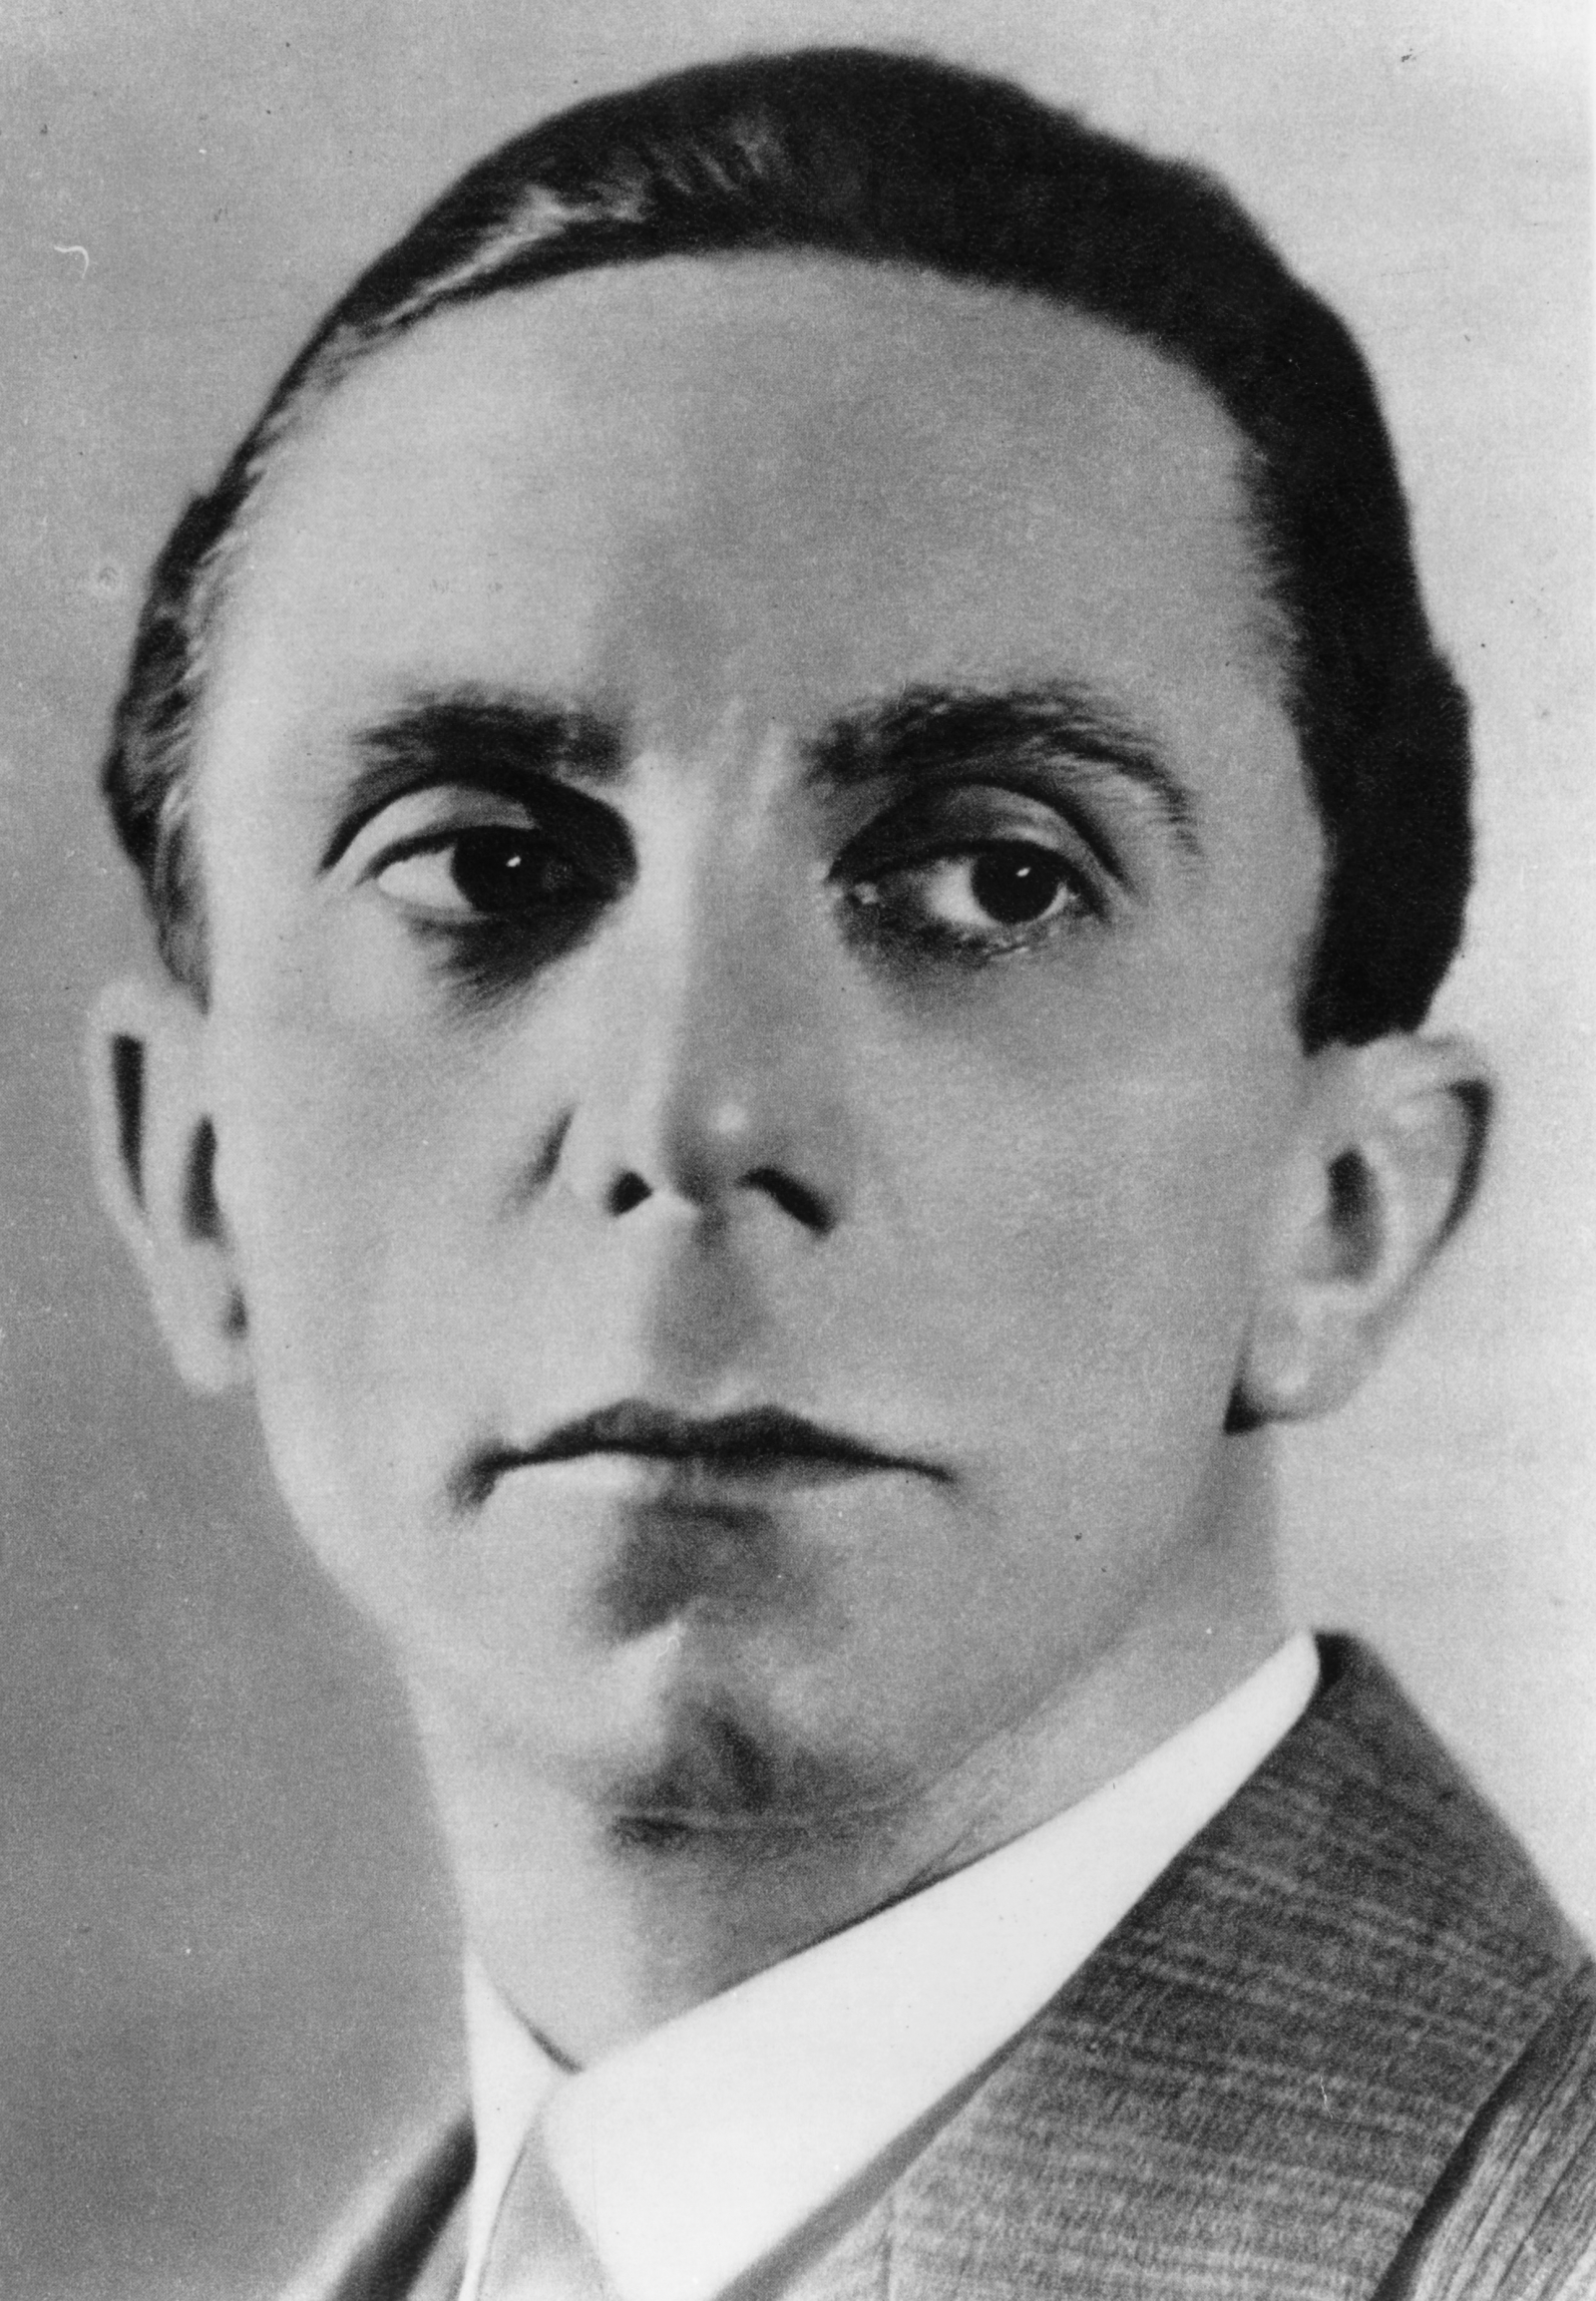 Joseph Goebbels' estate sues publisher for printing quotes 